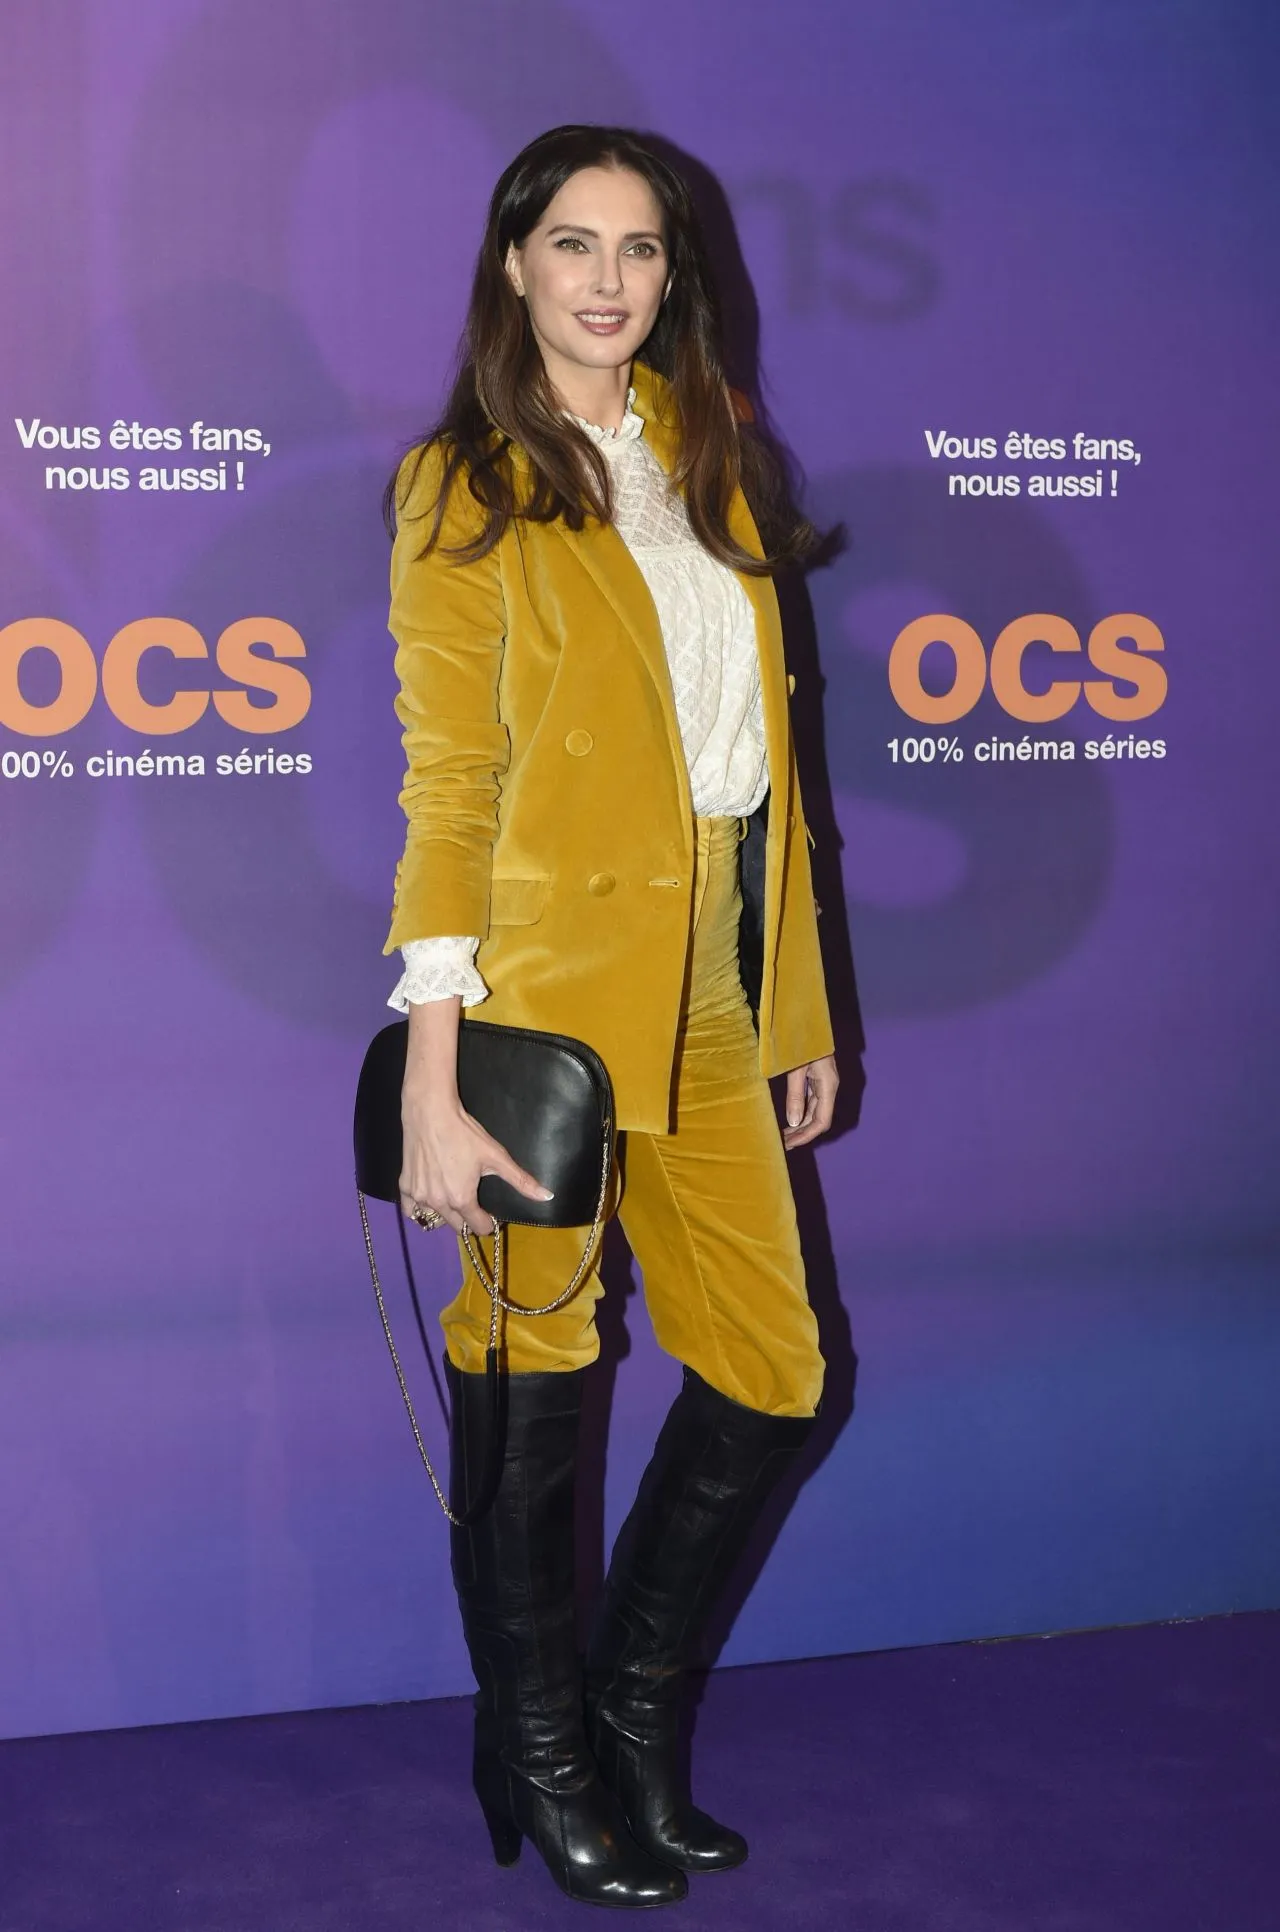 FREDERIQUE BEL AT OCS 10TH ANNIVERSARY PARTY AT PAVILLON IN PARIS10